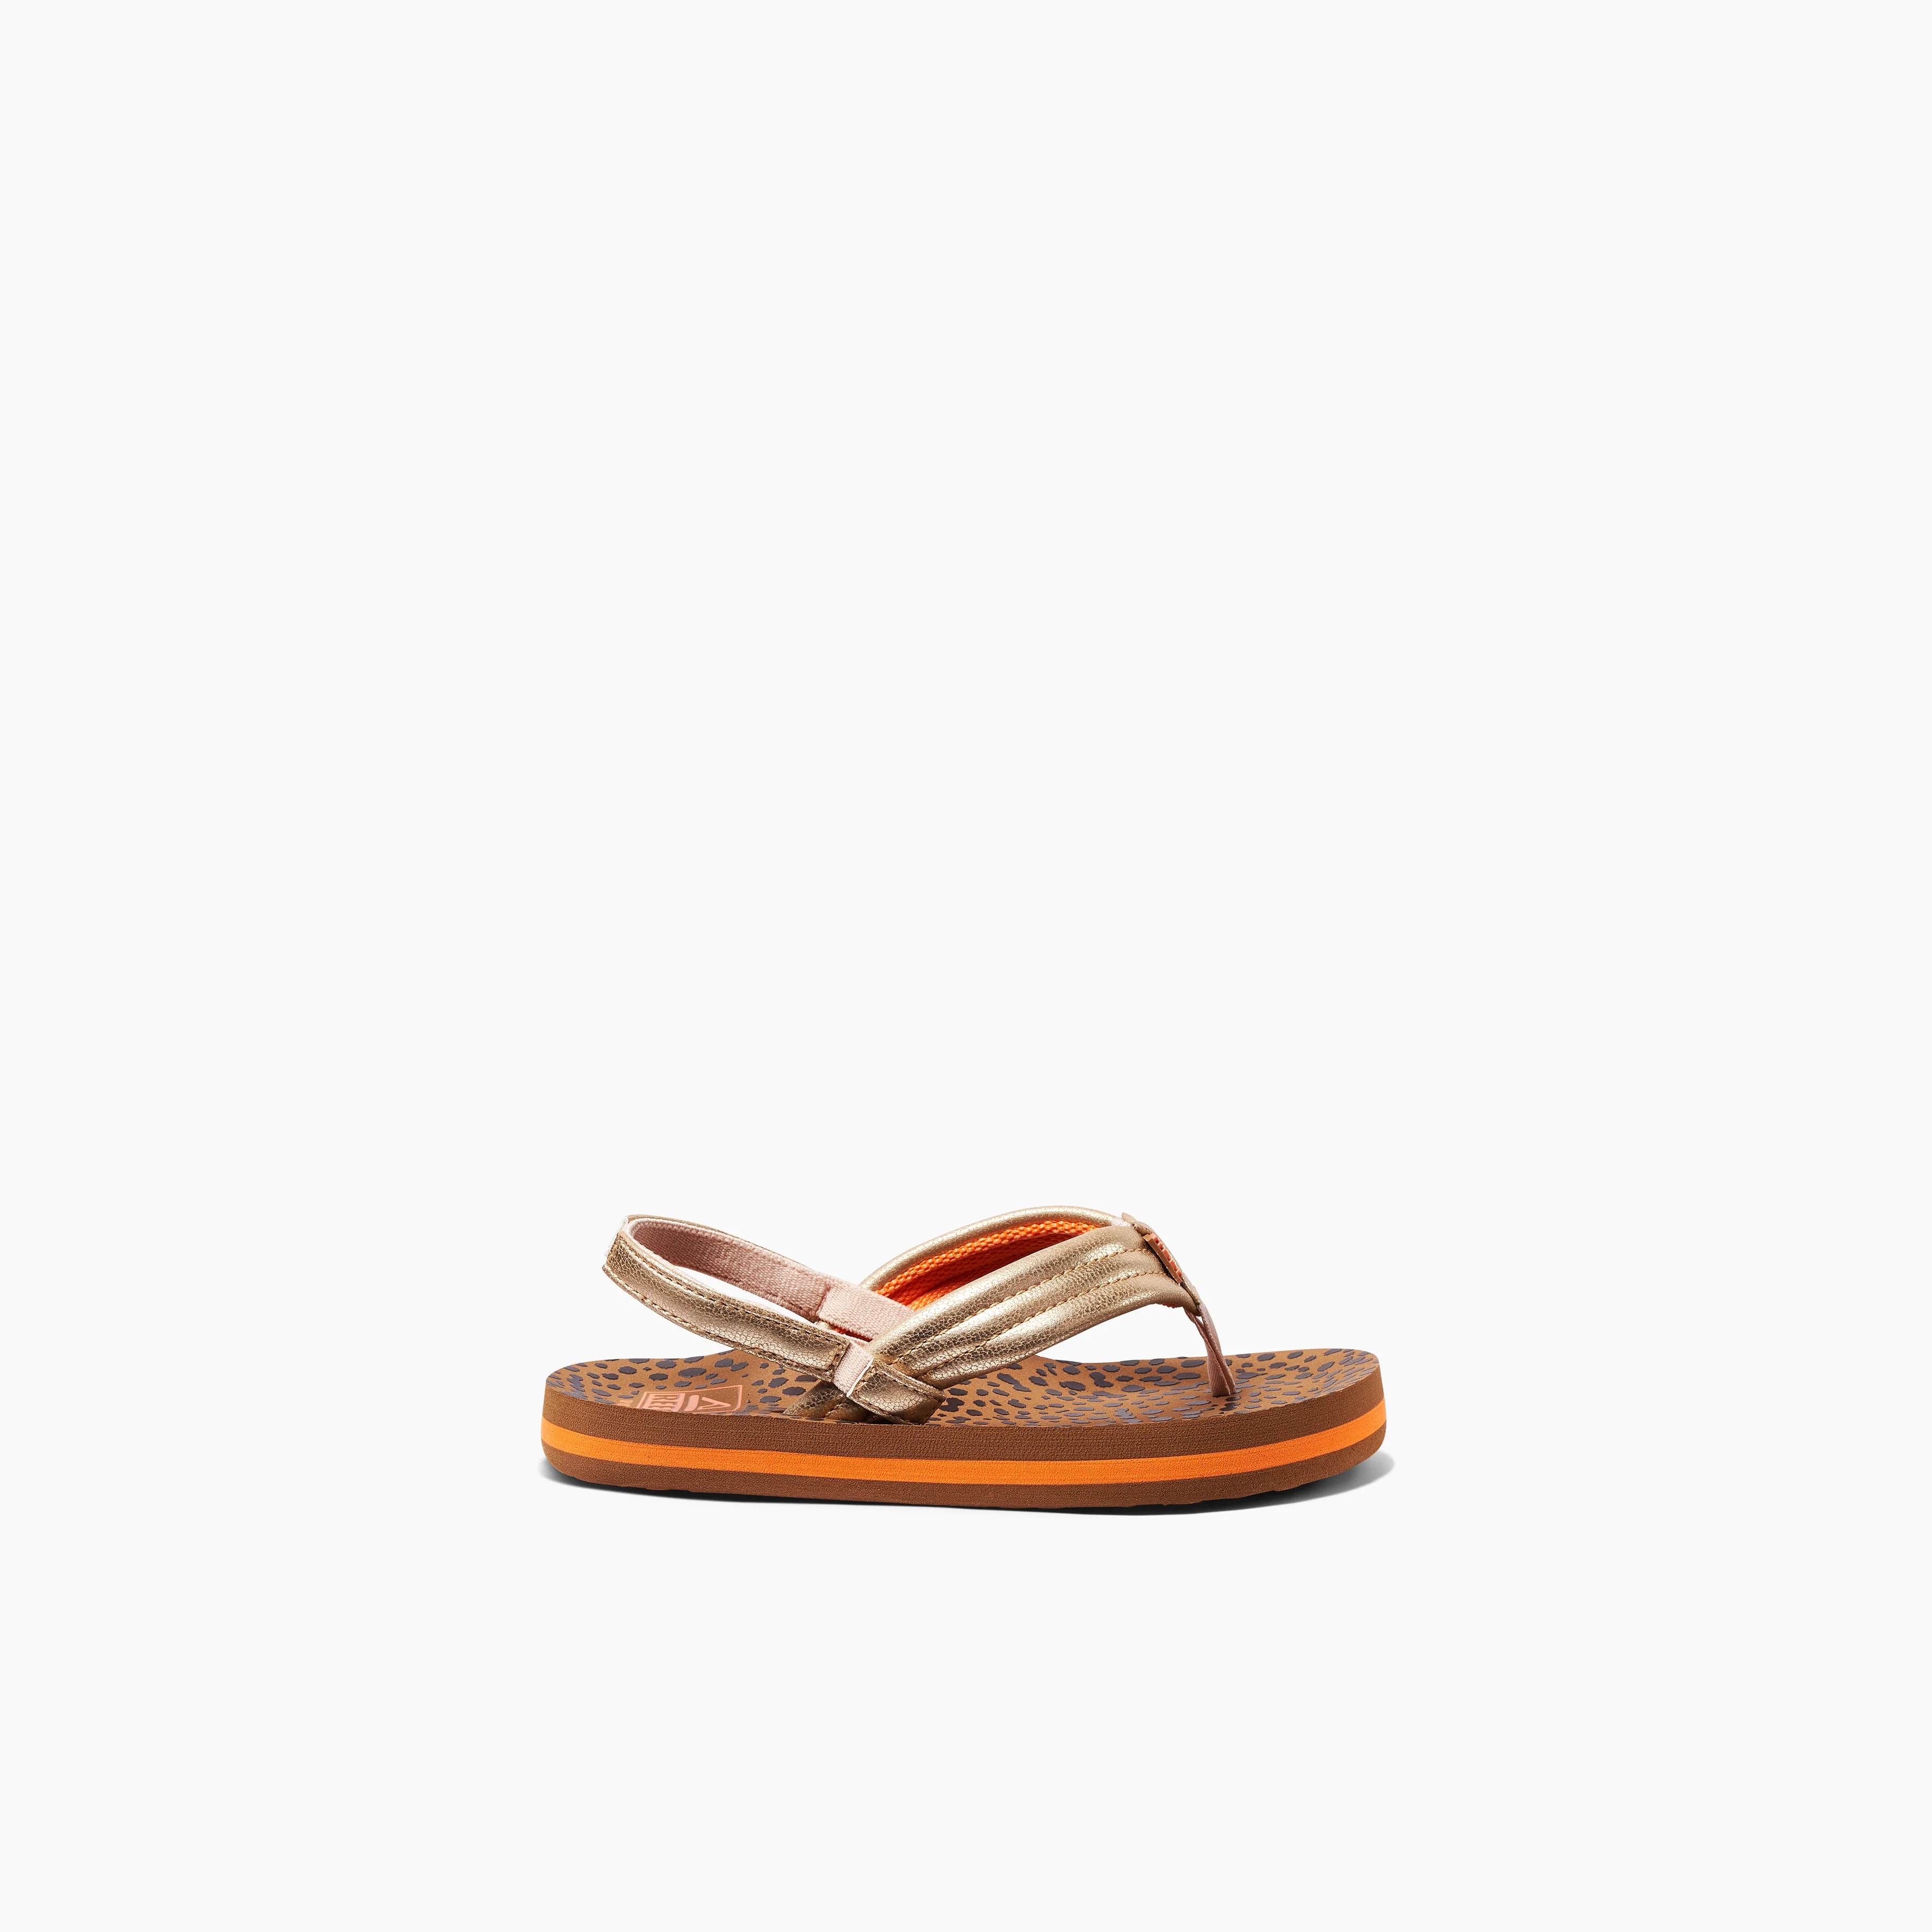 Toddler Girl's Ahi Sandals in Wild side view